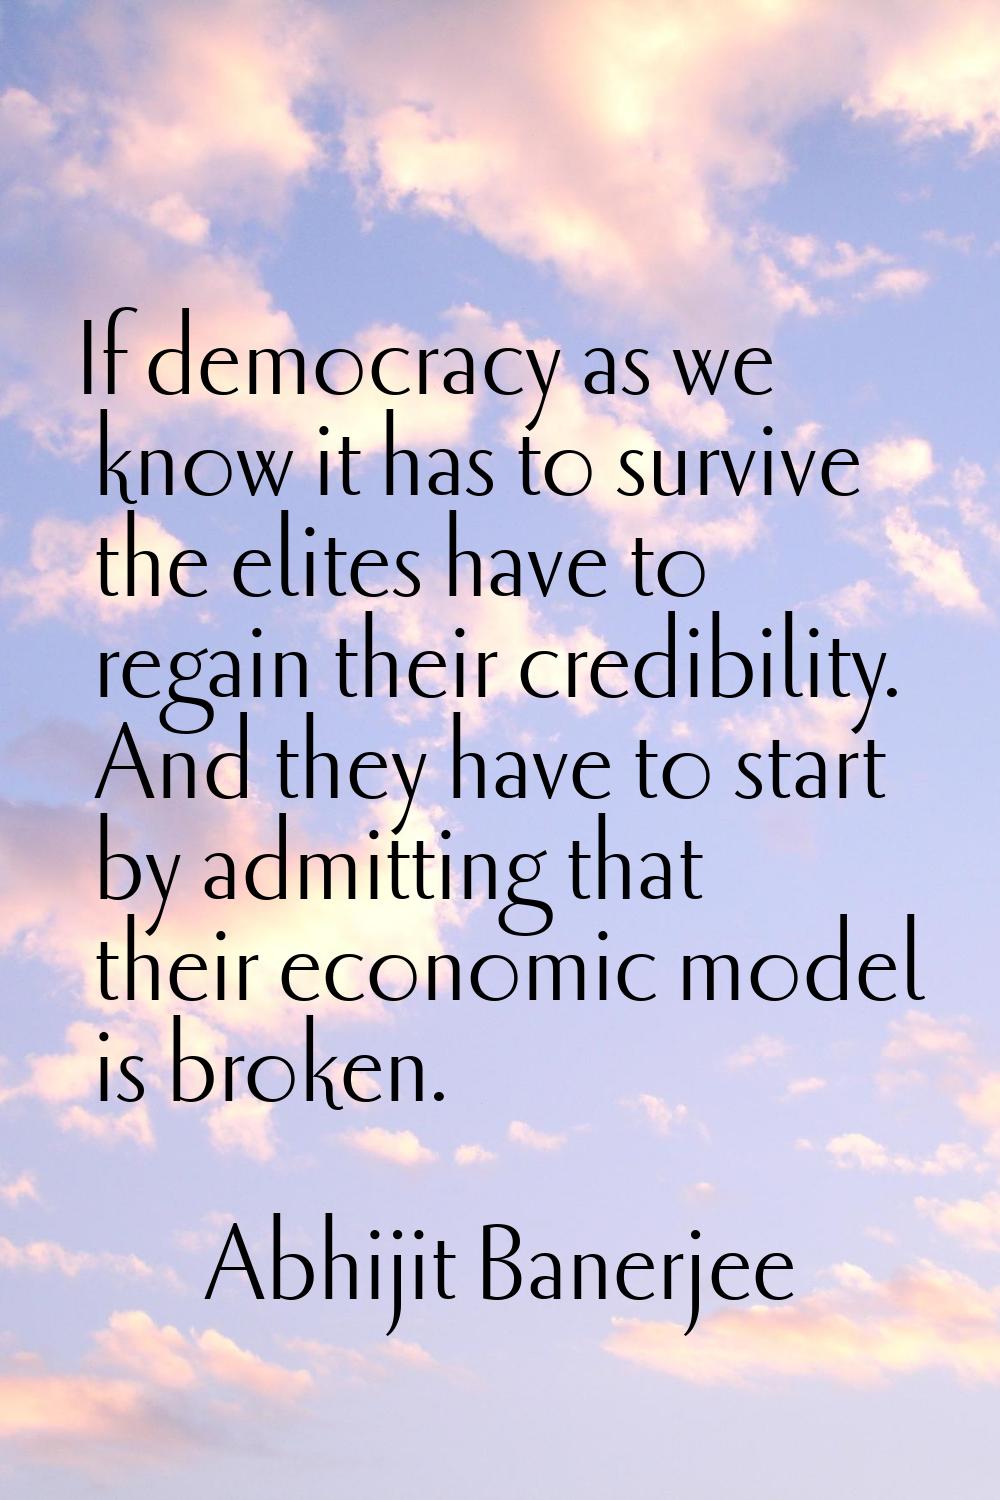 If democracy as we know it has to survive the elites have to regain their credibility. And they hav